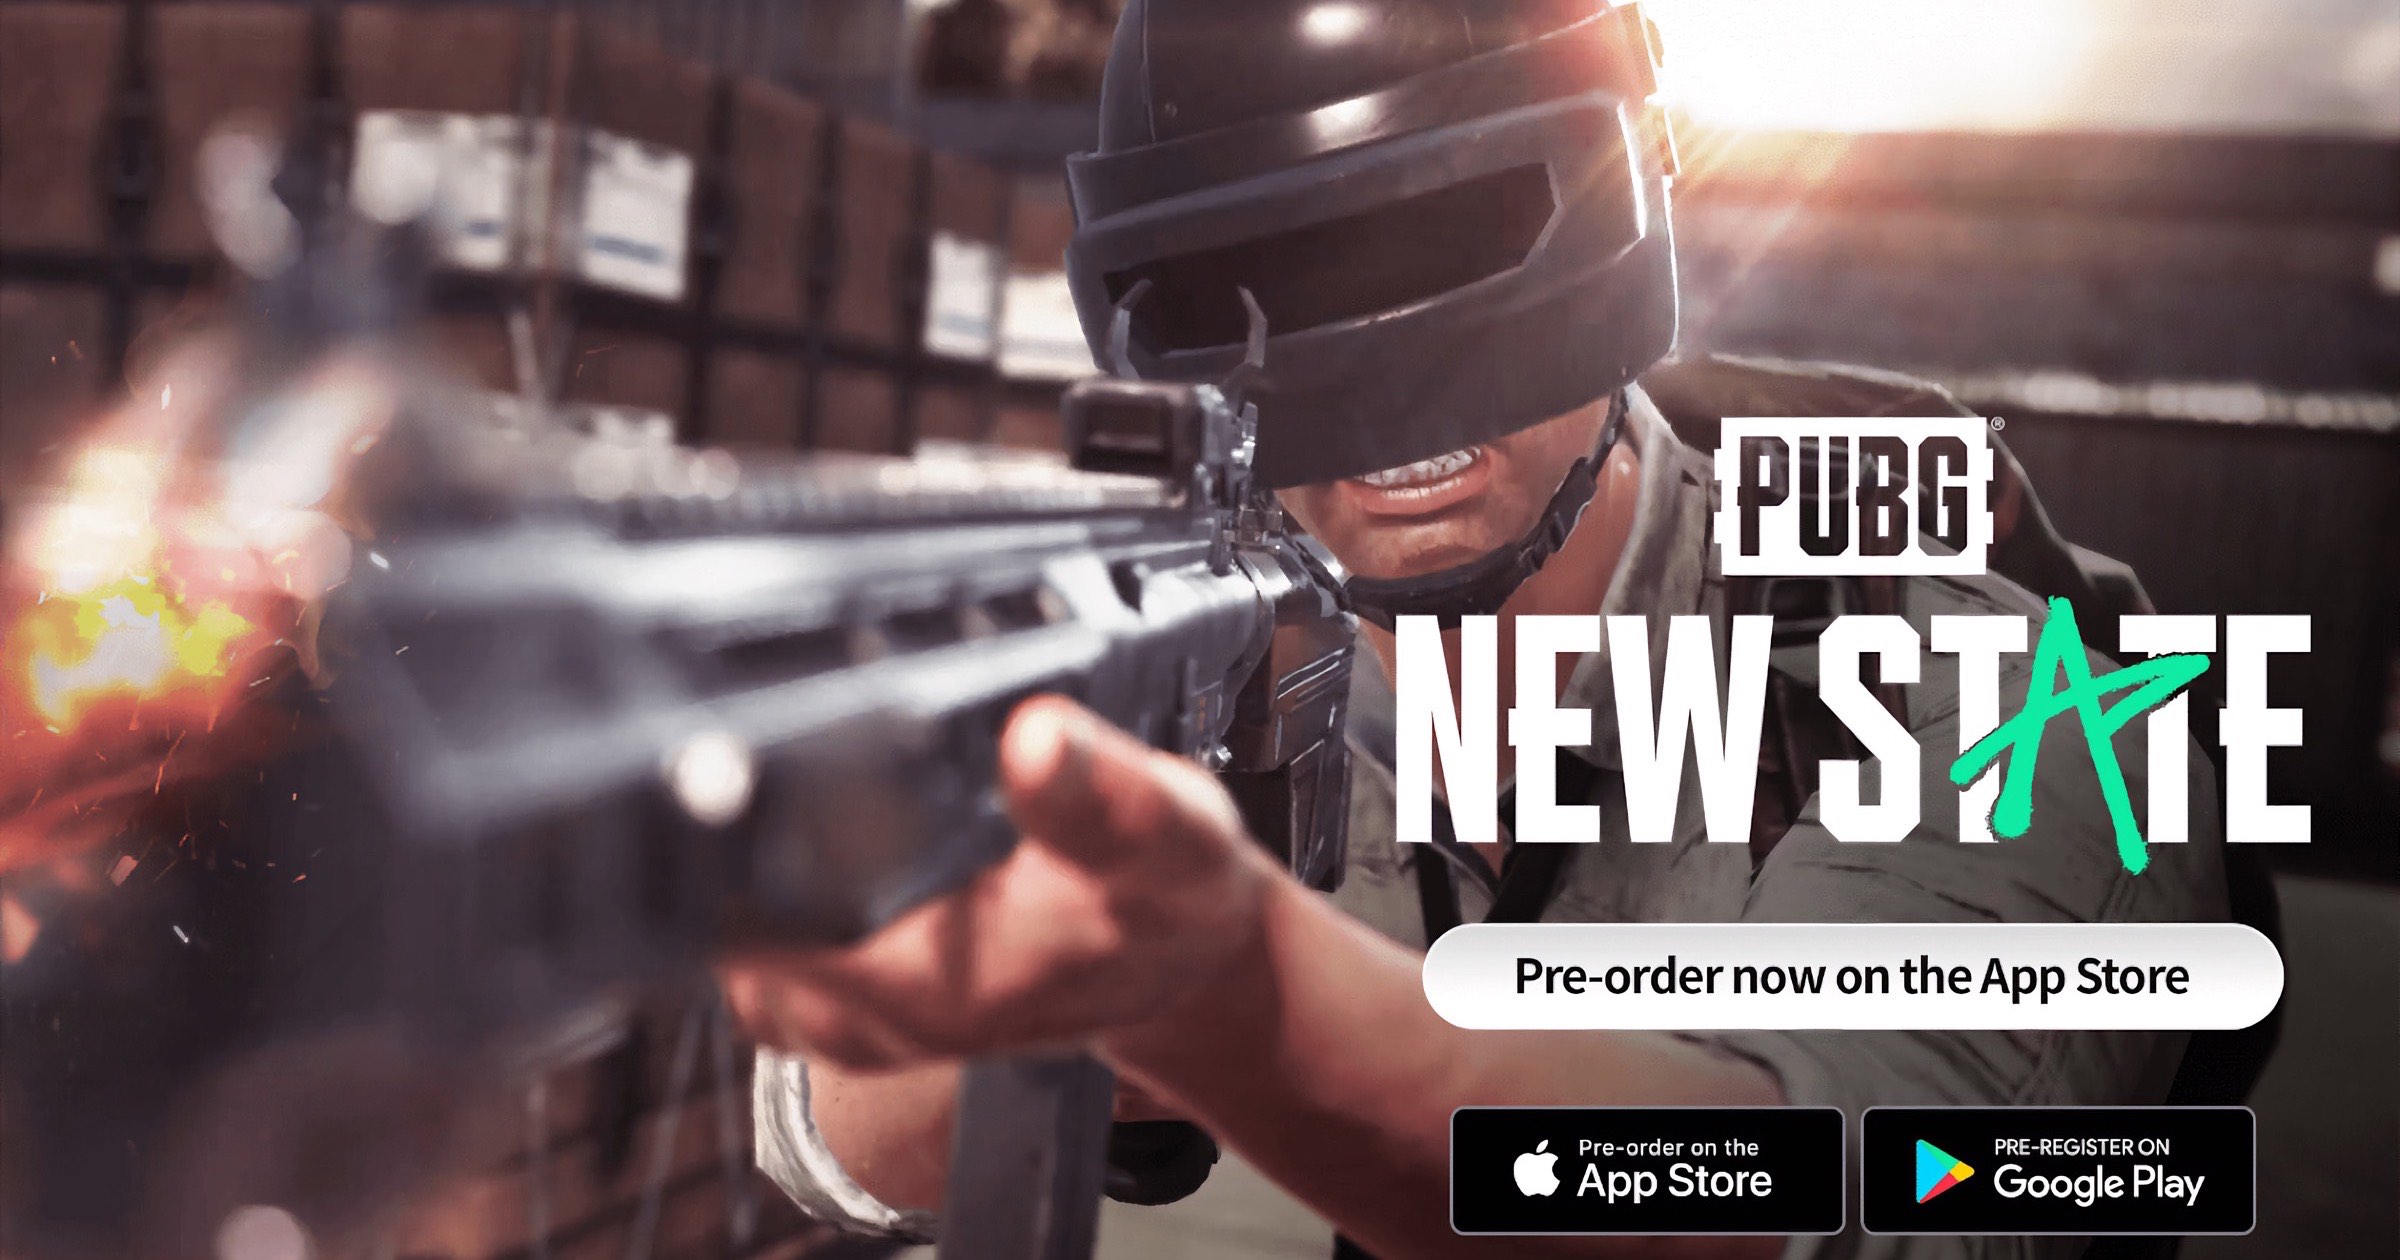 App Store Preorders Open for ‘PUBG: NEW STATE’ Game